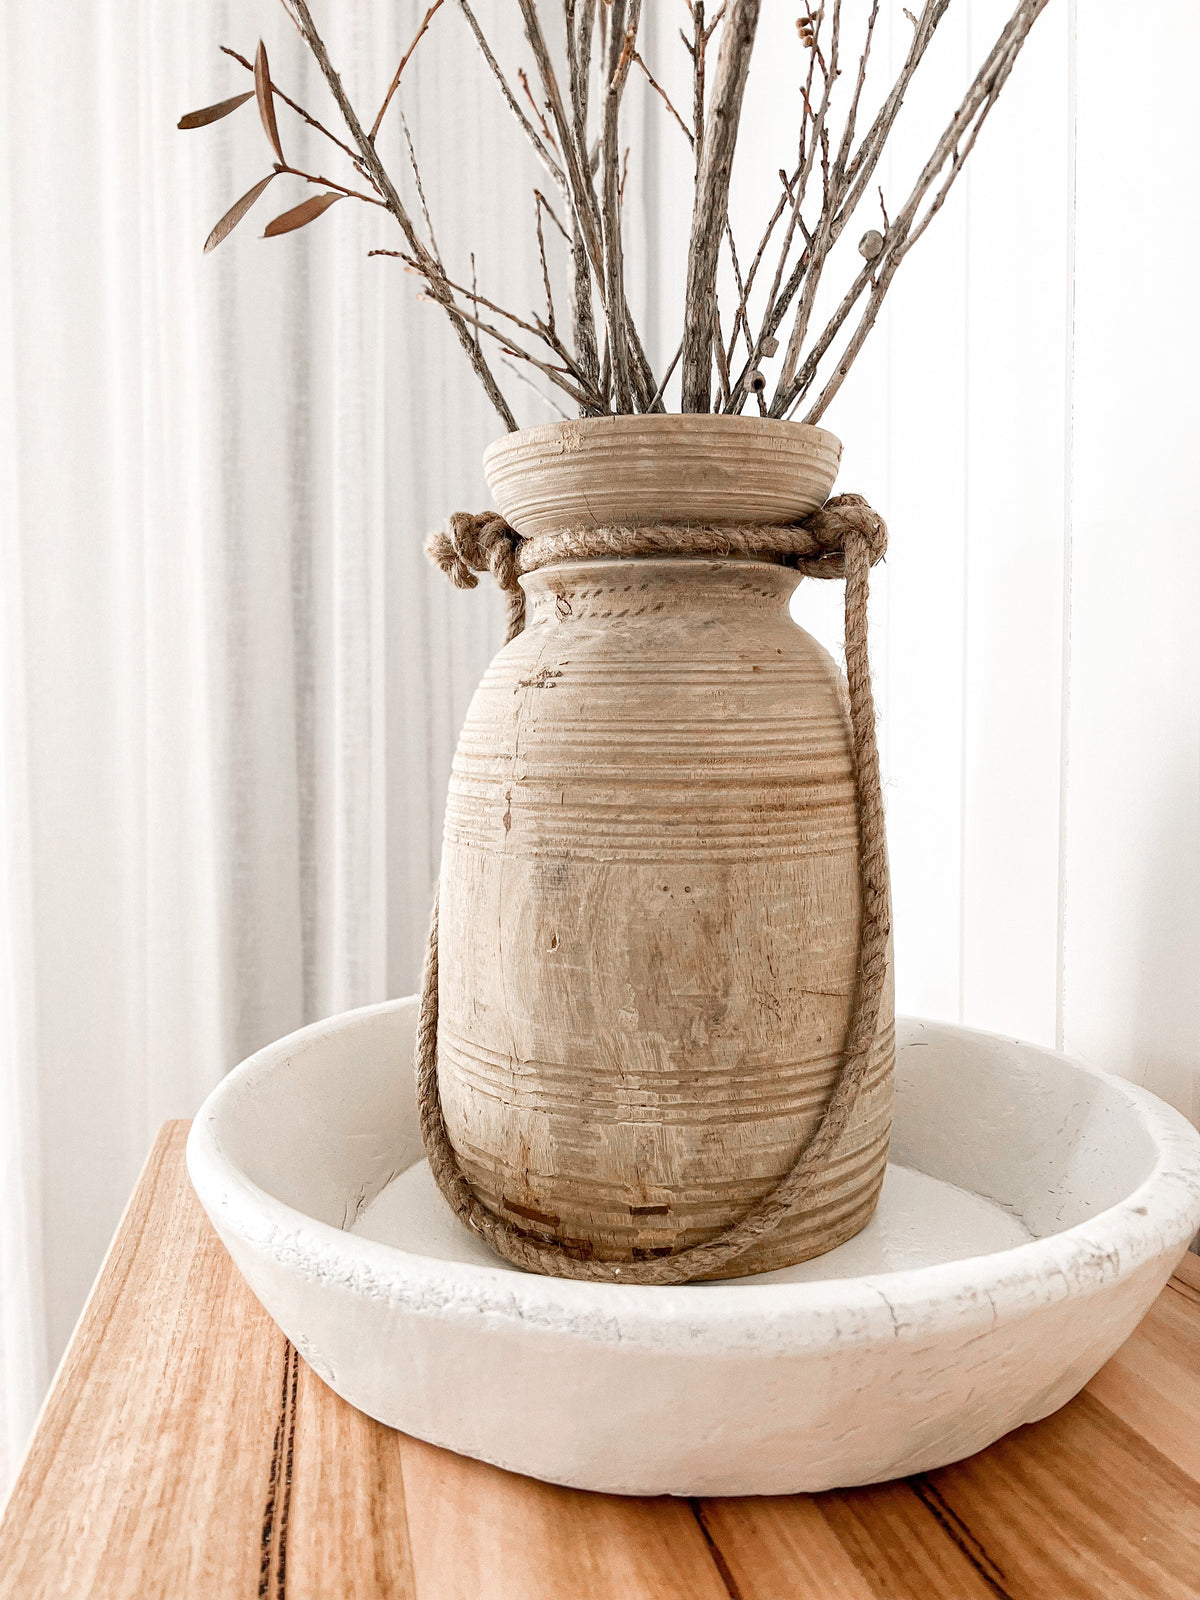 These authentic pots are unique antique pieces dating back approximately 50 years. Each one complete with a beautiful raw earthy aesthetic, a bleached finish & a thick braided Jute handle. Display these treasures empty or fill with your favourite dried florals. Each with a history & story of its own, these one of a kind pieces come with perfect imperfections adding to their rustic appearance. Rustic indian wooden decor. vintage antique farmhouse homewares australia, sale now on 